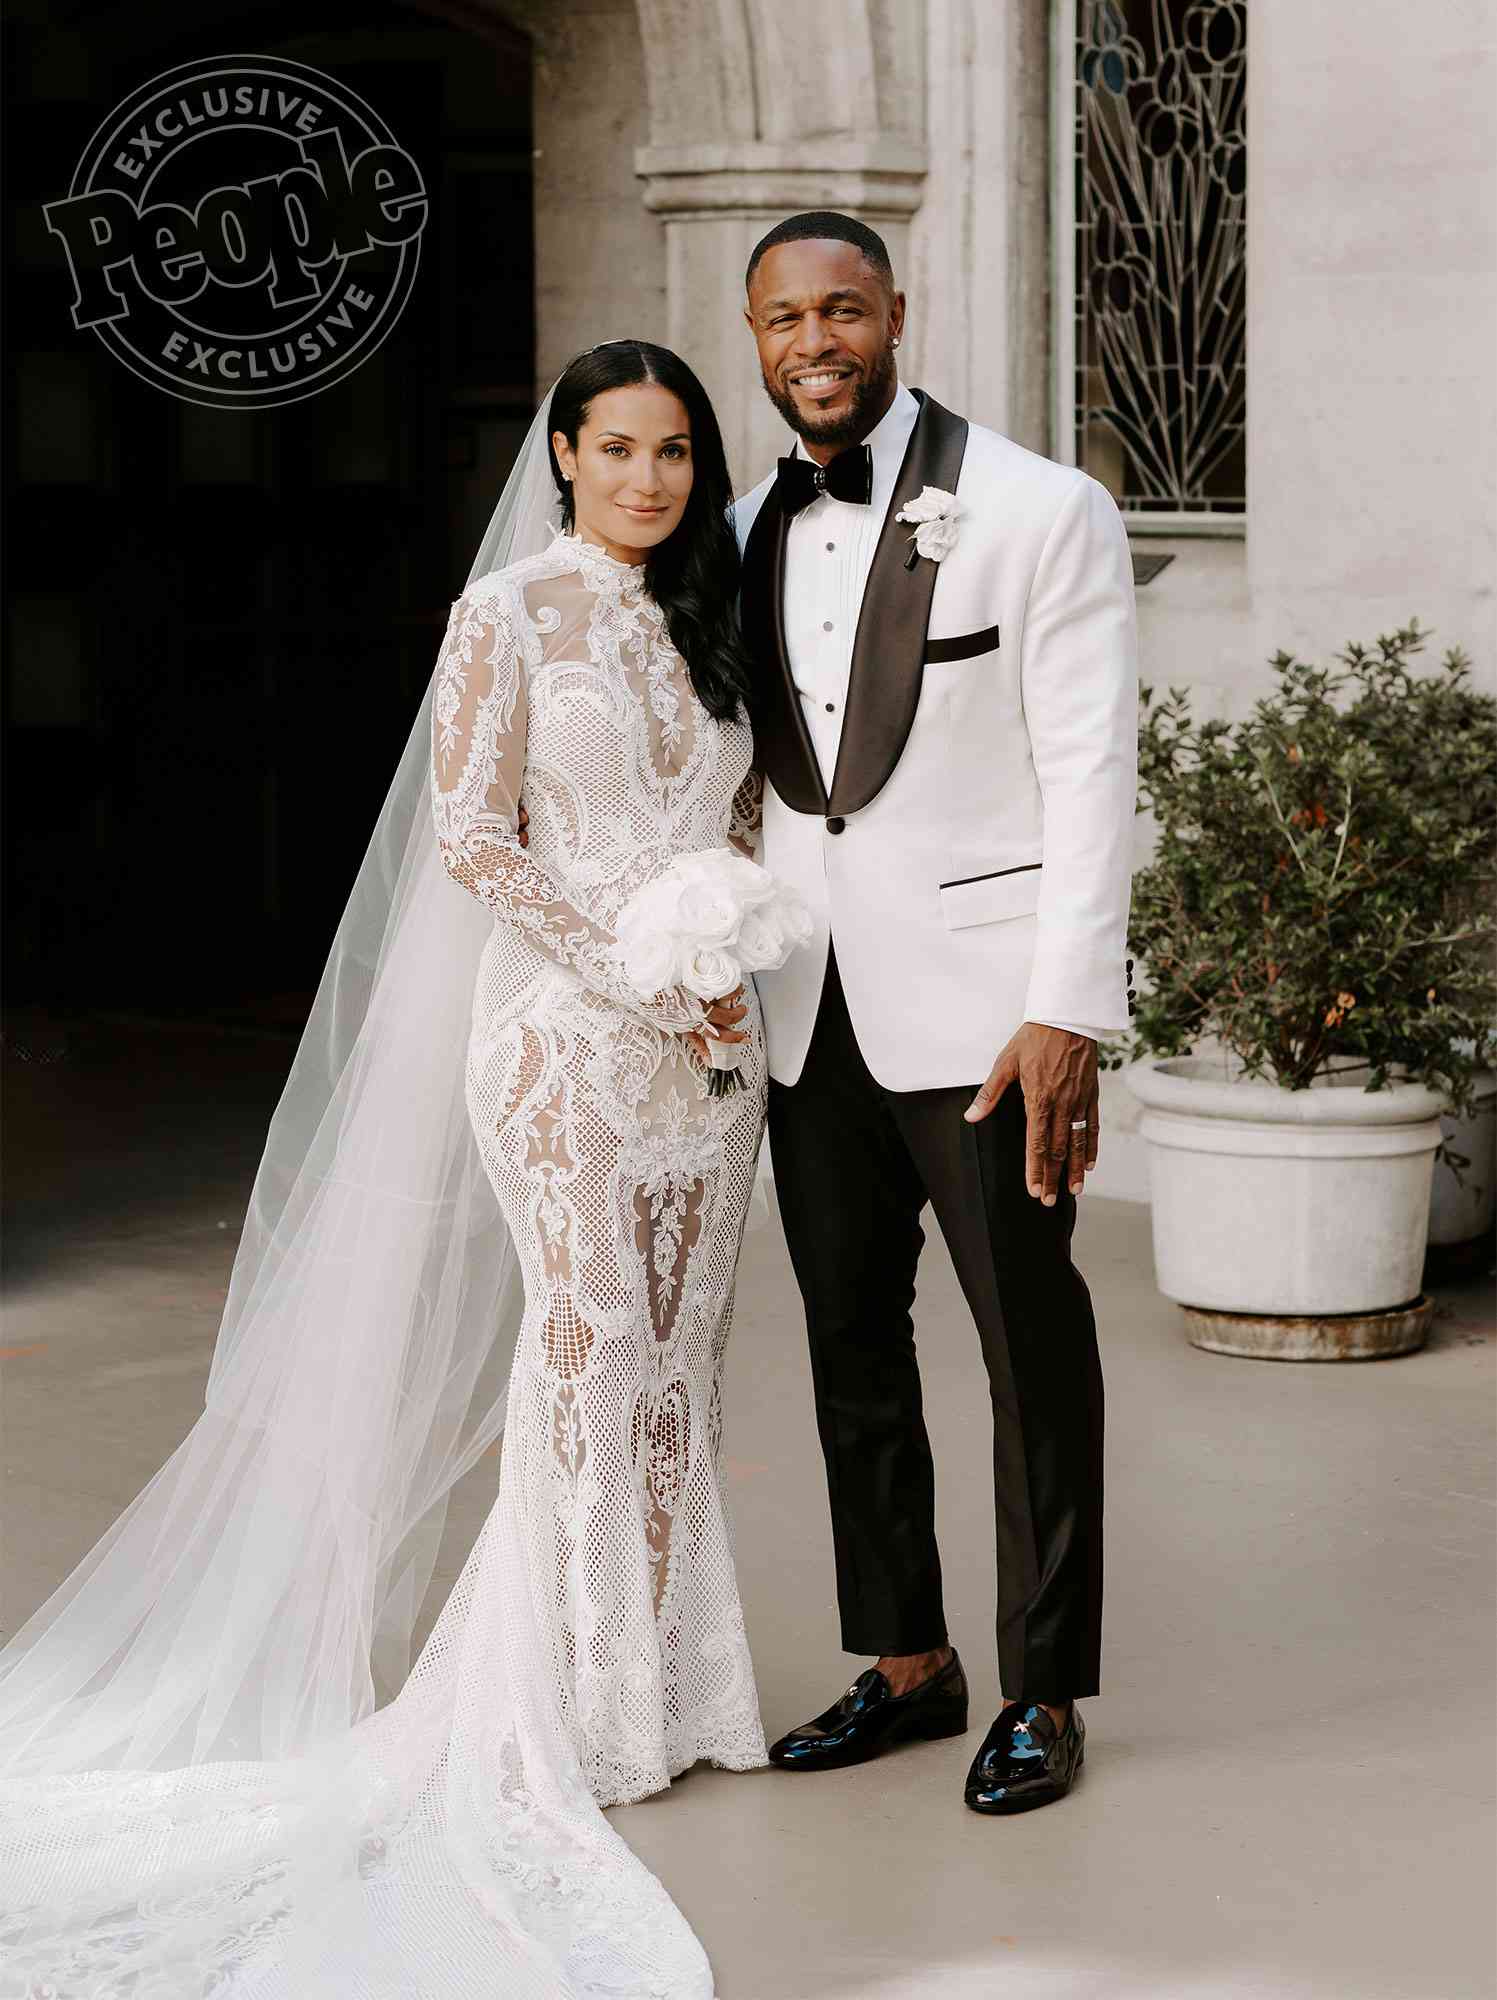 This day represents the beginning of forever," says Tank of his weddin...